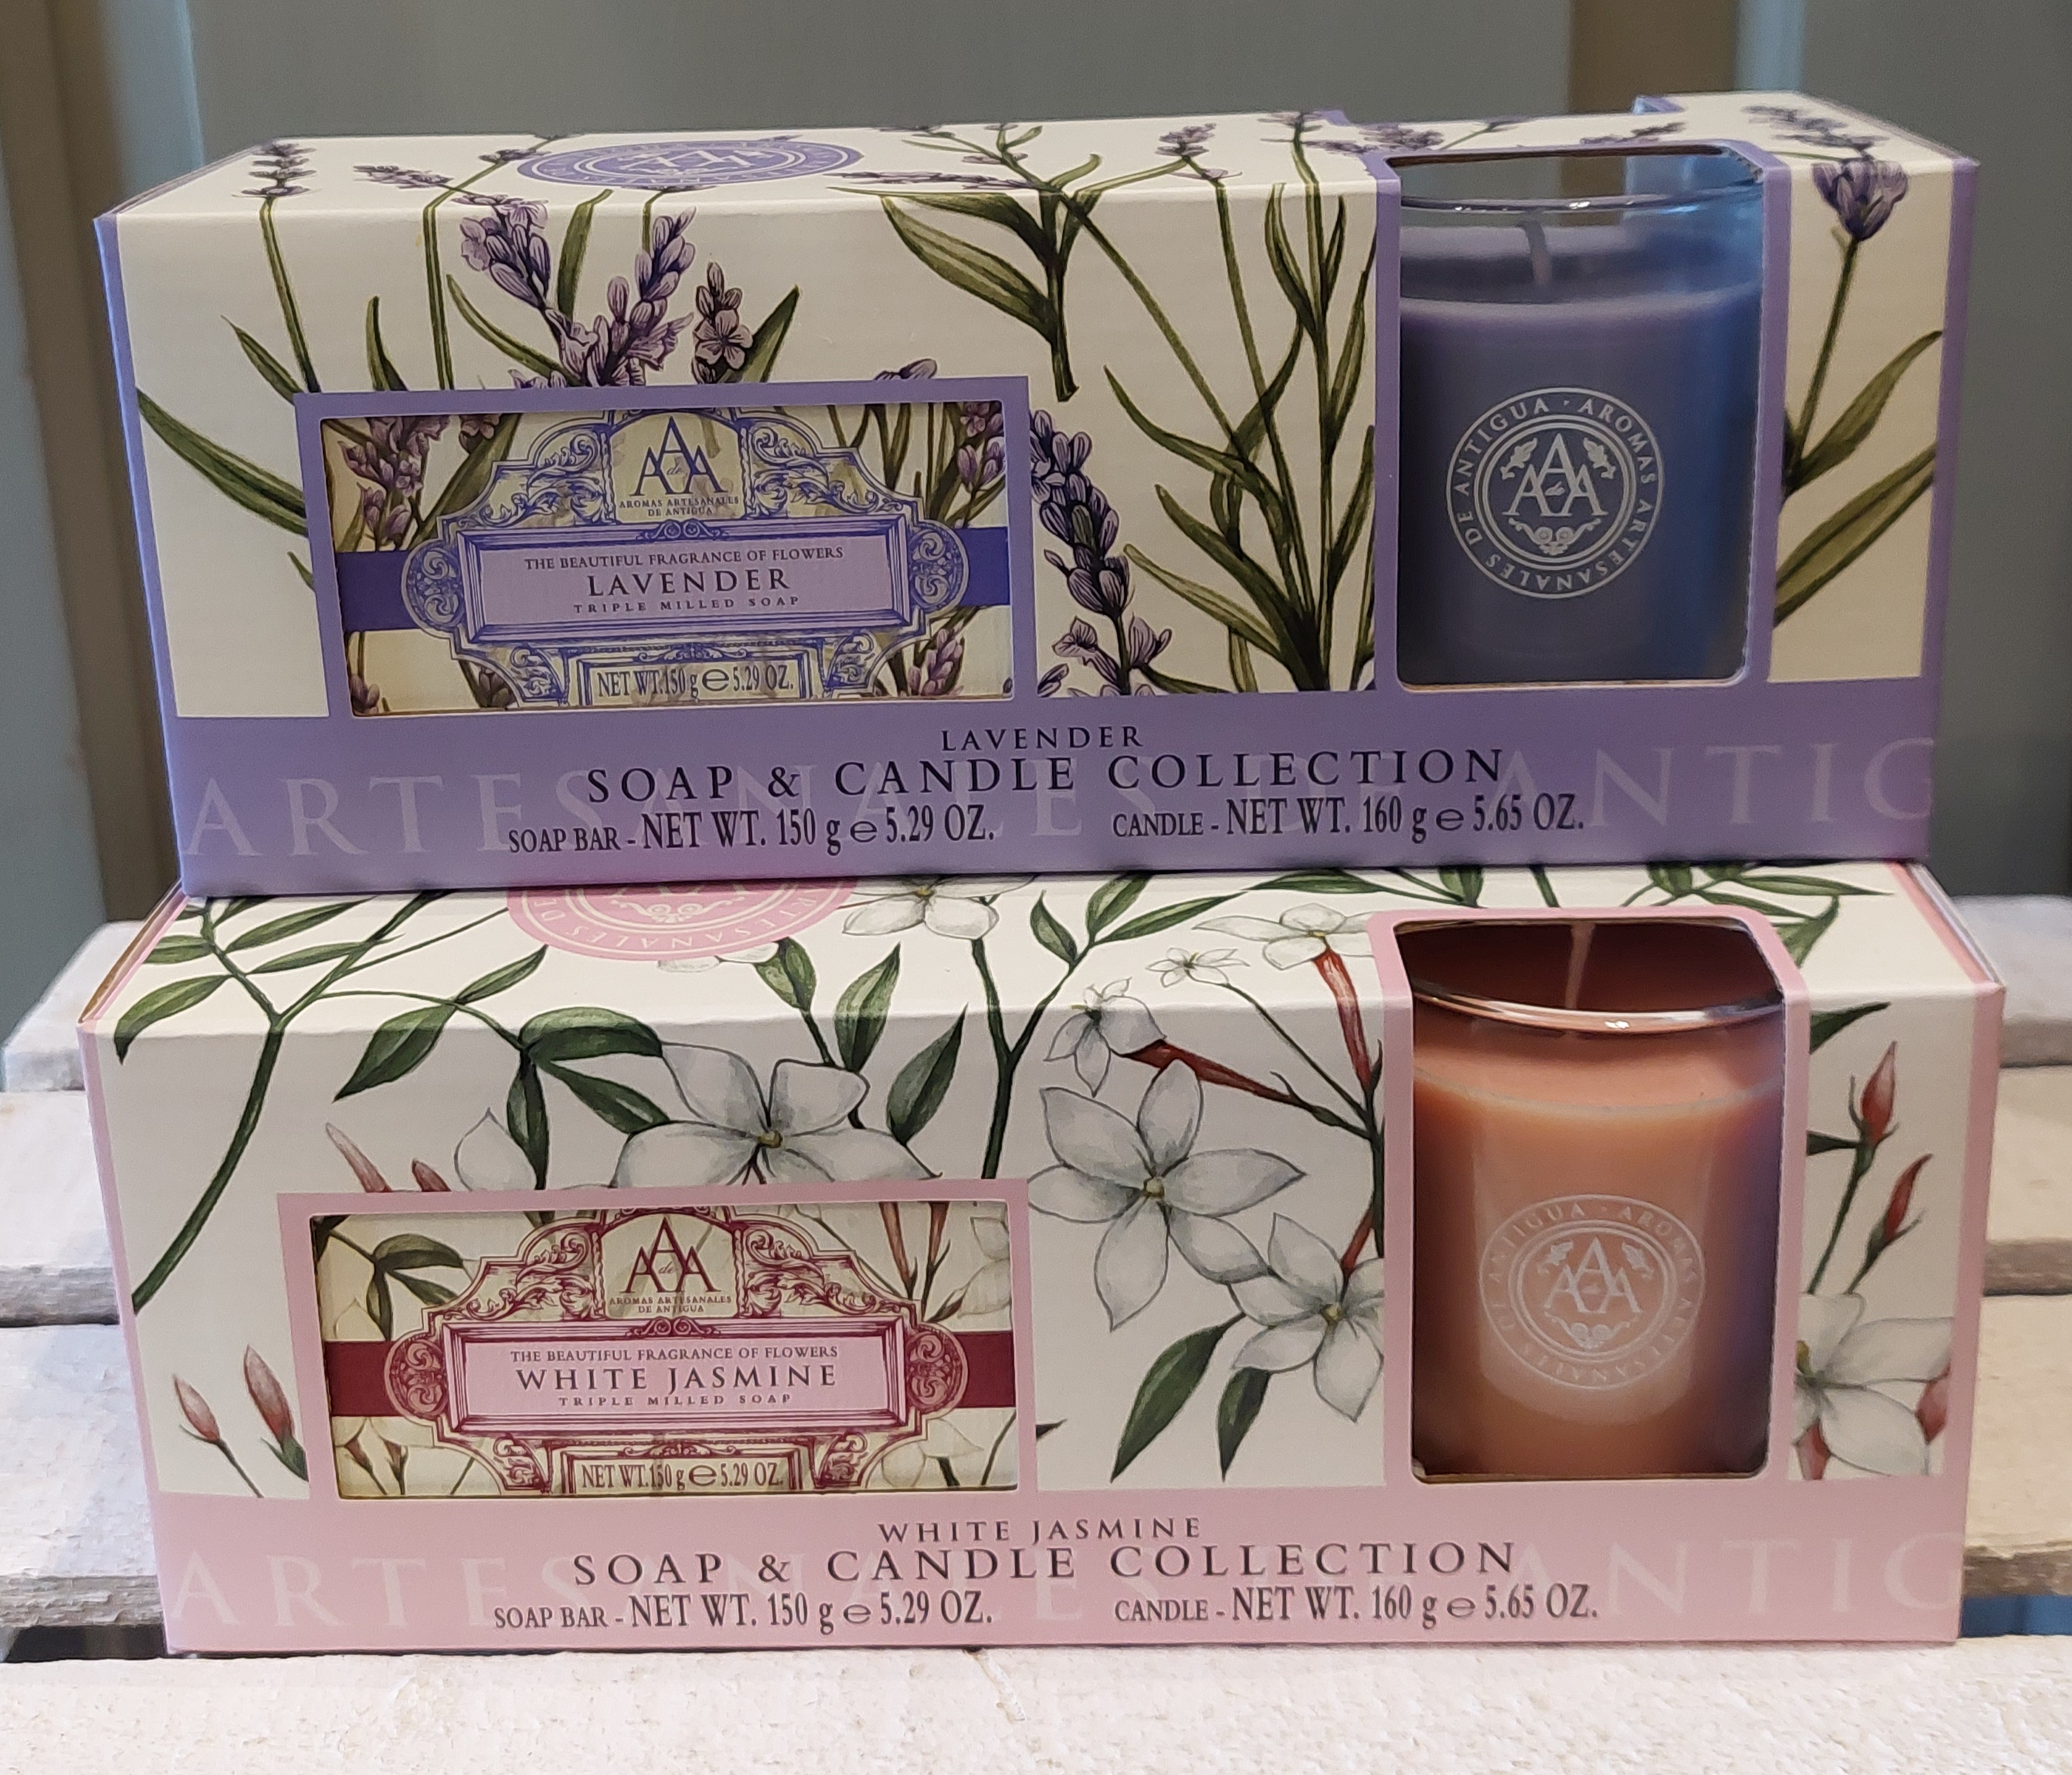 Soap and Candle Collections